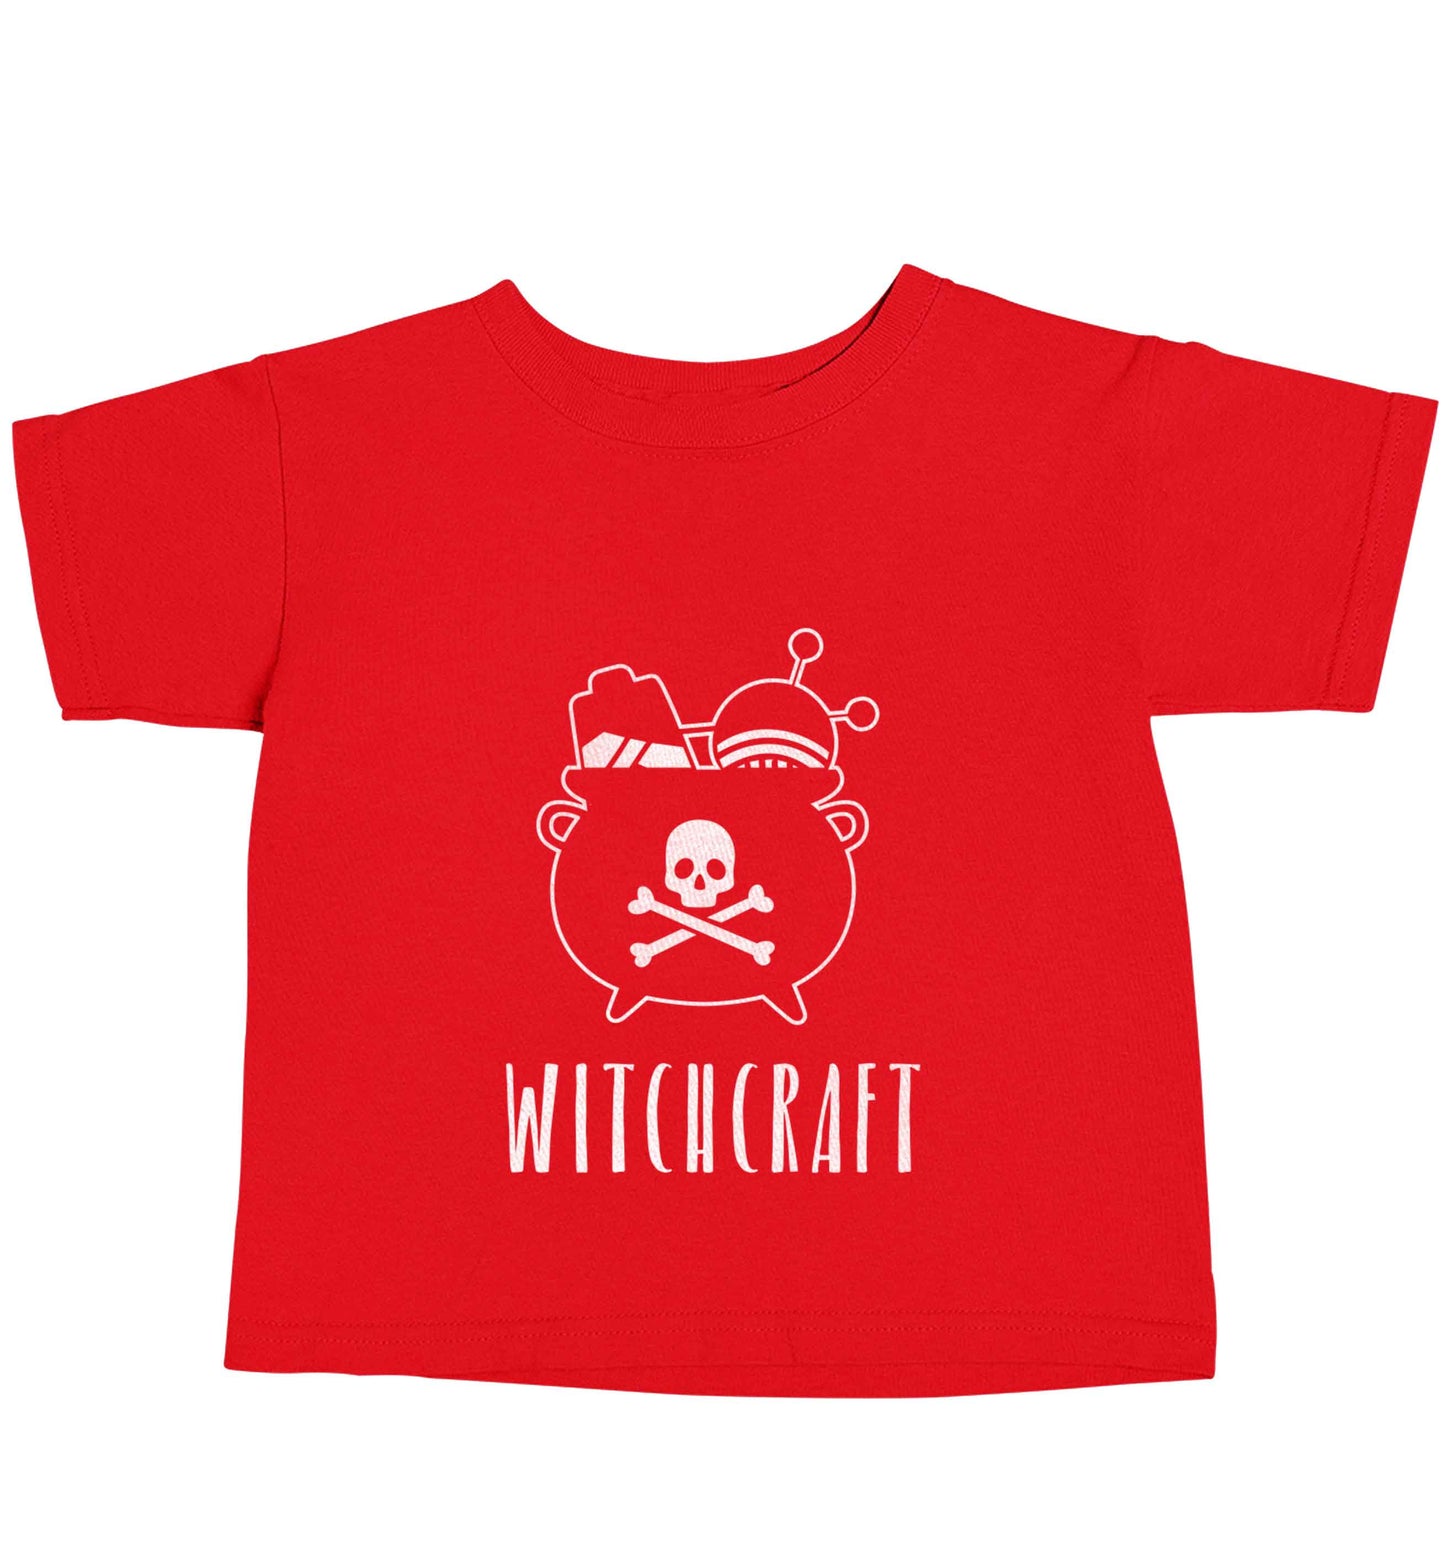 Witchcraft red baby toddler Tshirt 2 Years